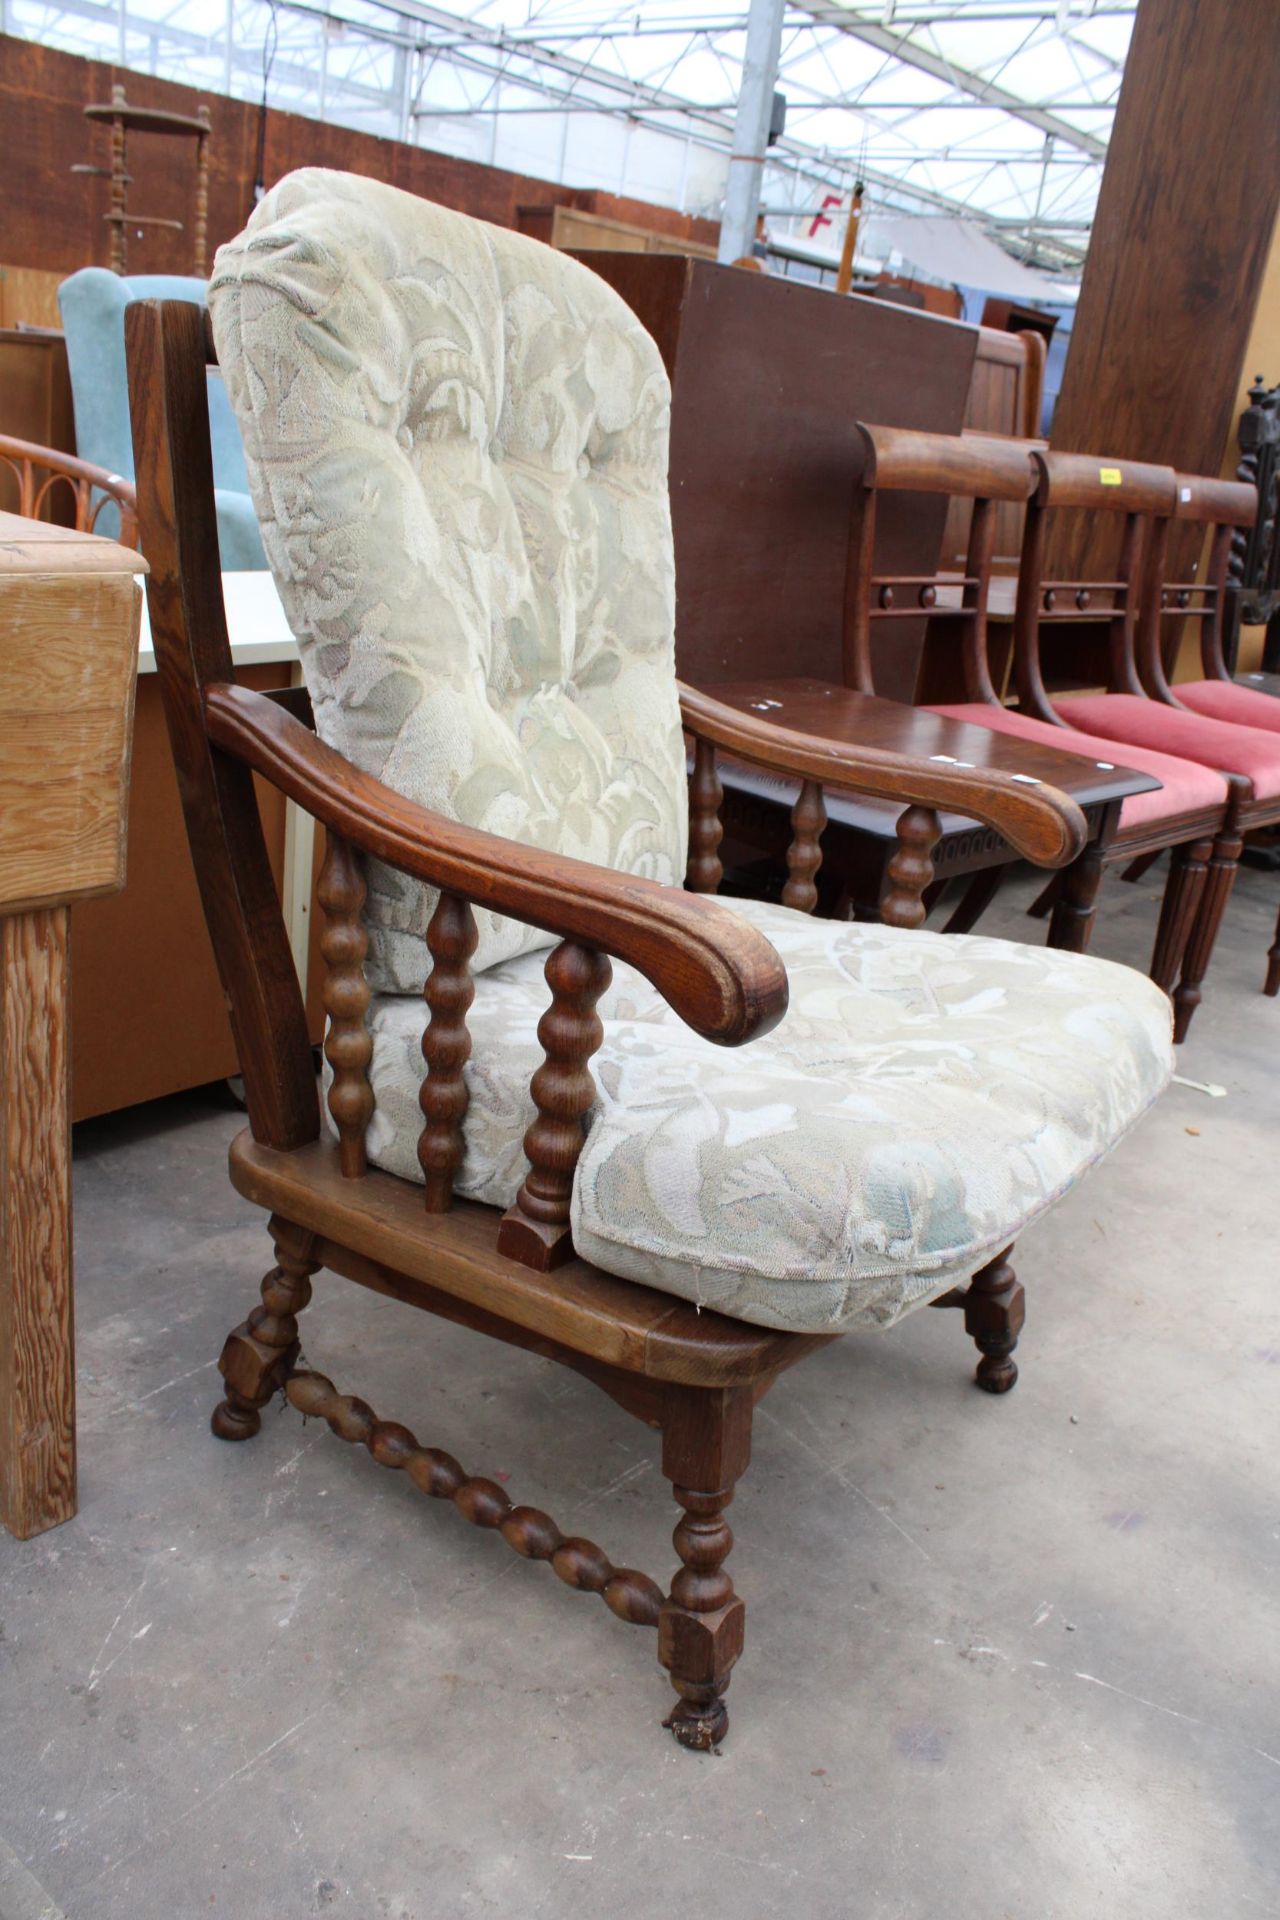 AN OAK FRAMED FIRESIDE CHAIR WITH TURNED LEGS AND UPRIGHTS - Image 2 of 2